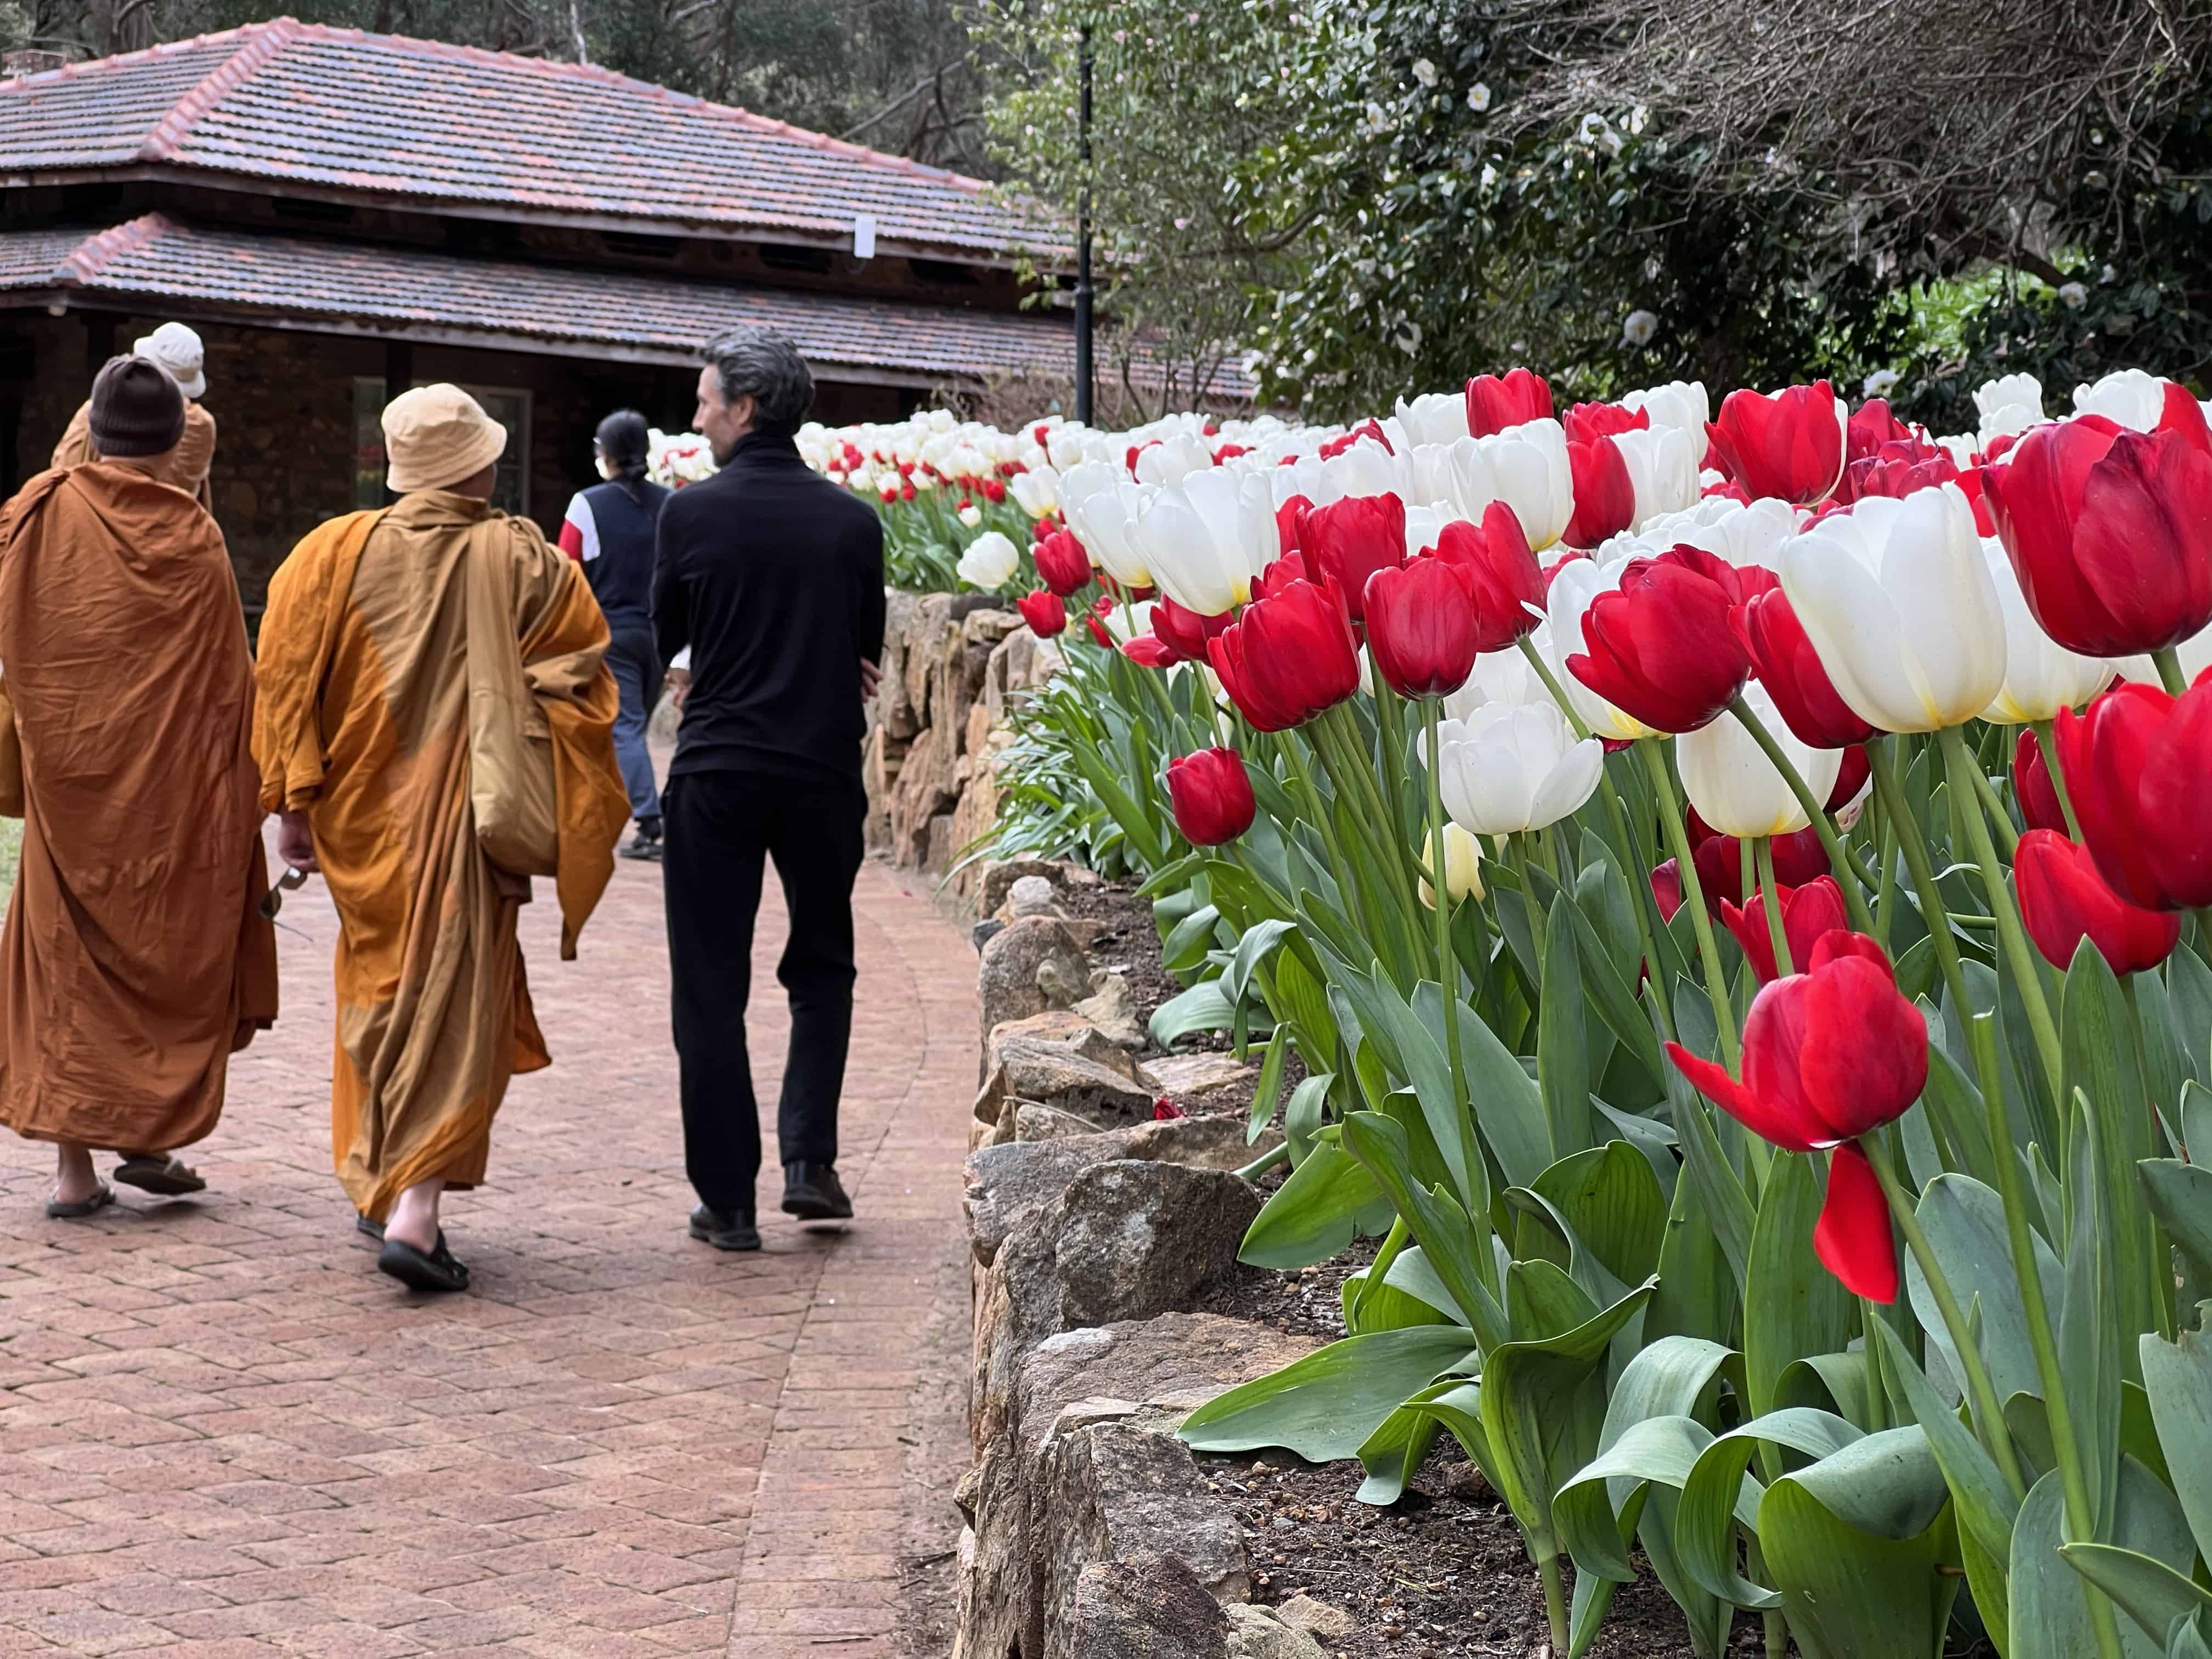 Group of monks walking next to tulip flower bed